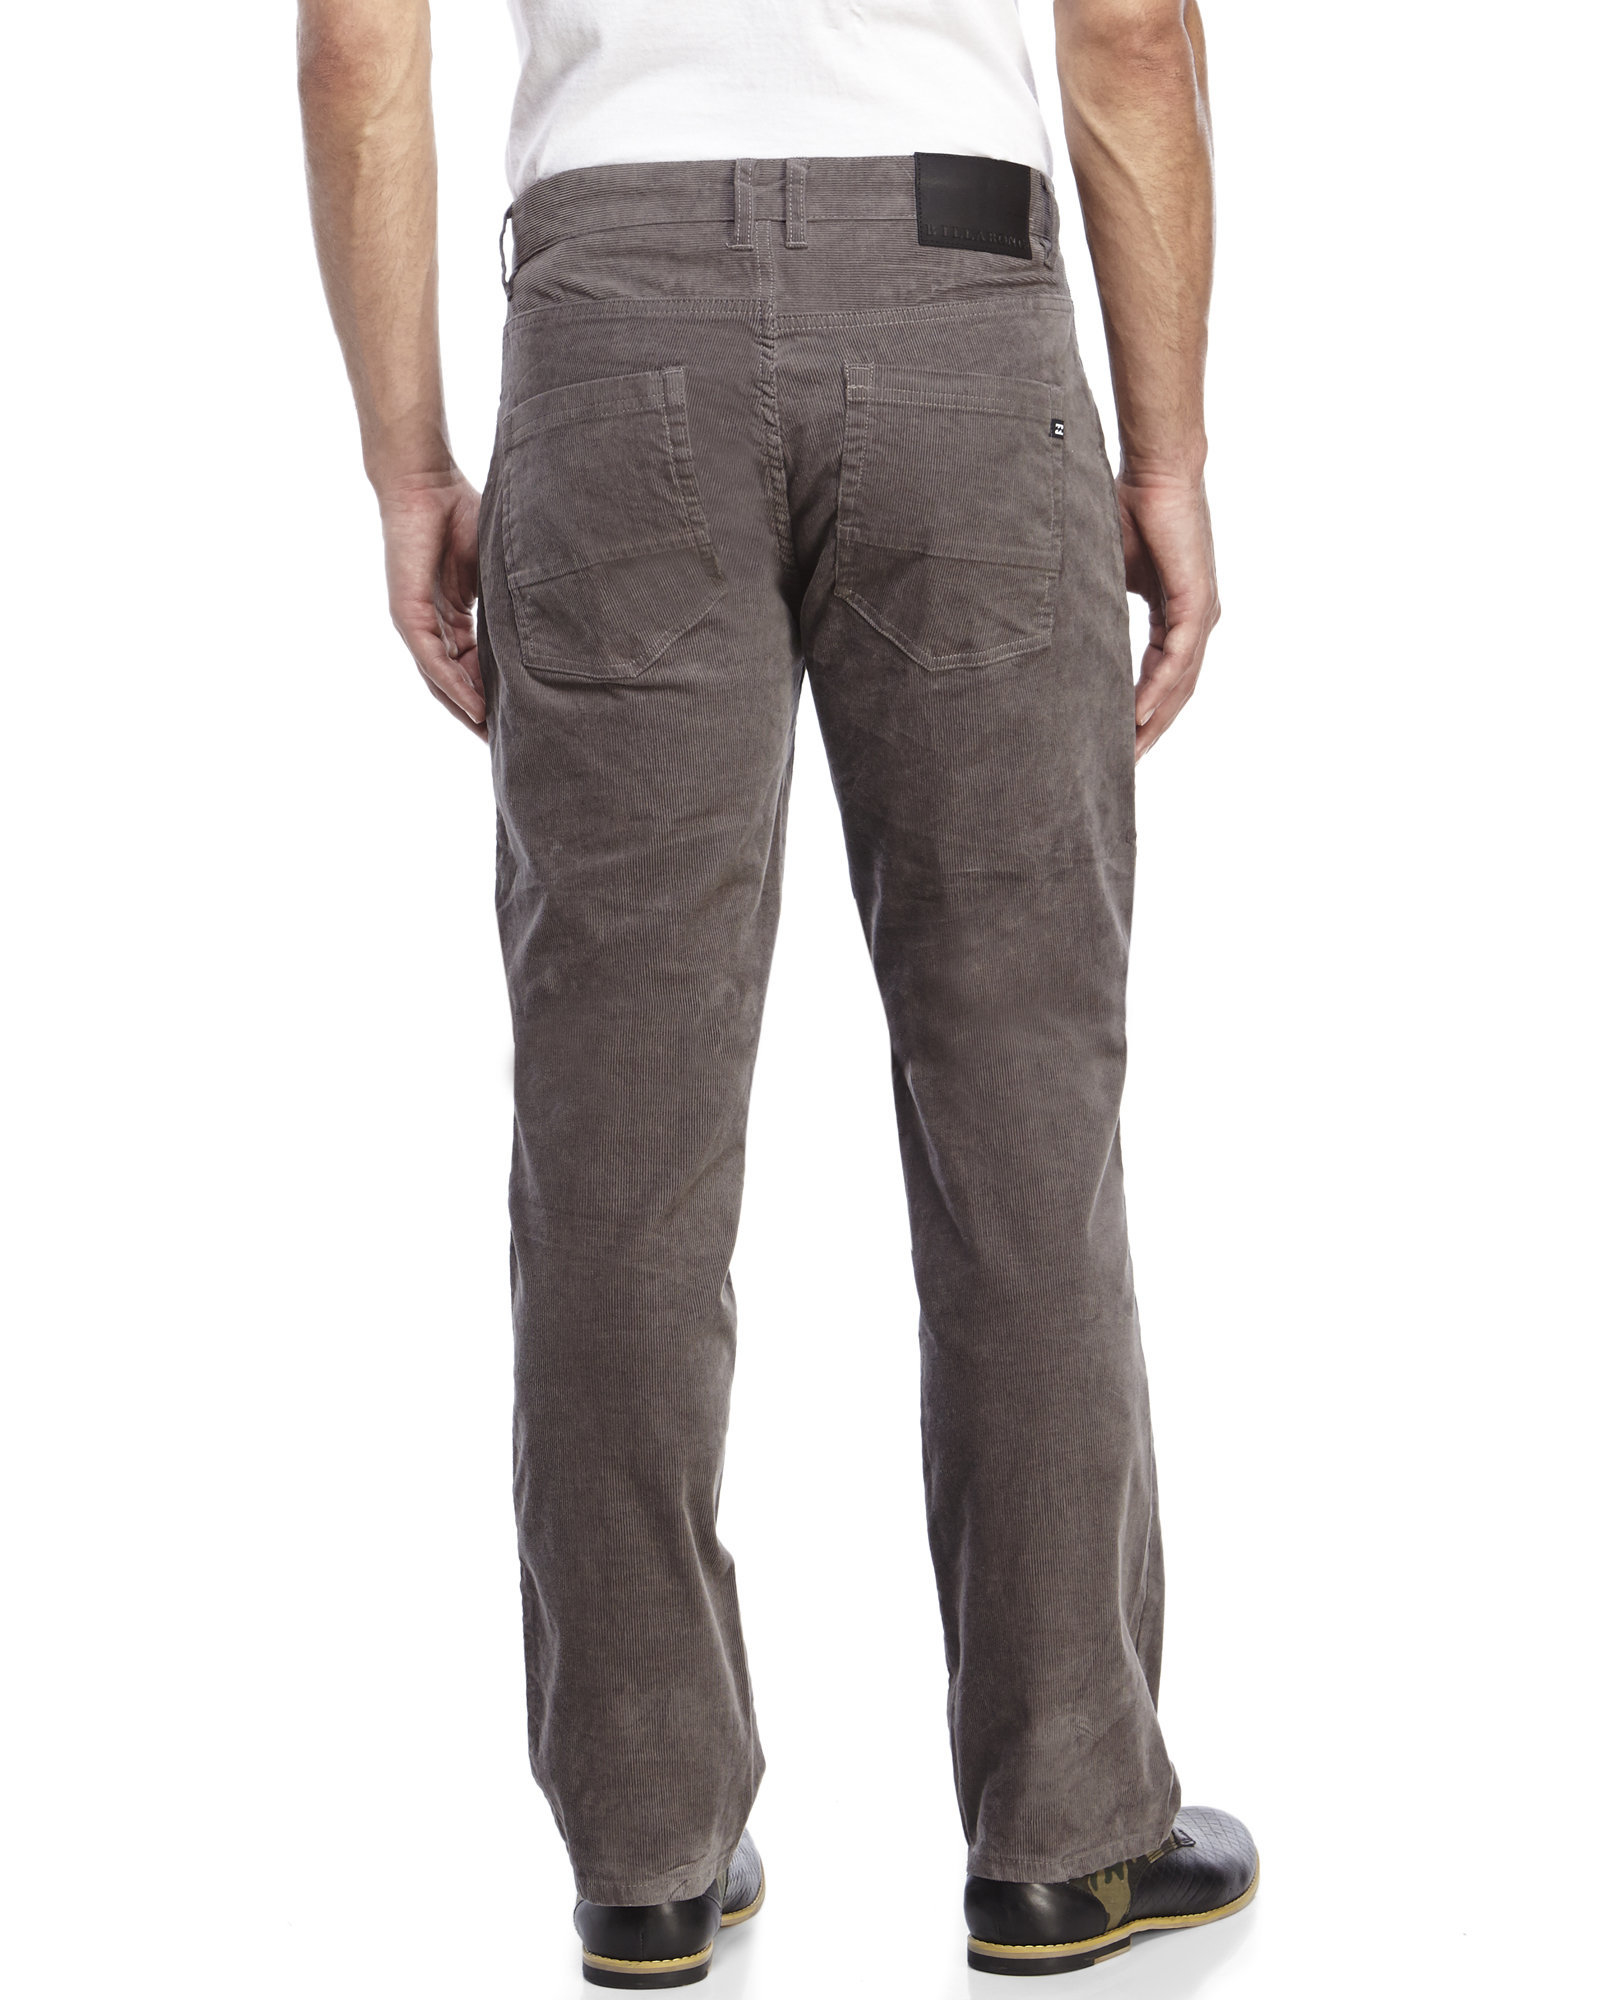 Lyst - Billabong Straight Fifty Corduroy Pants in Gray for Men